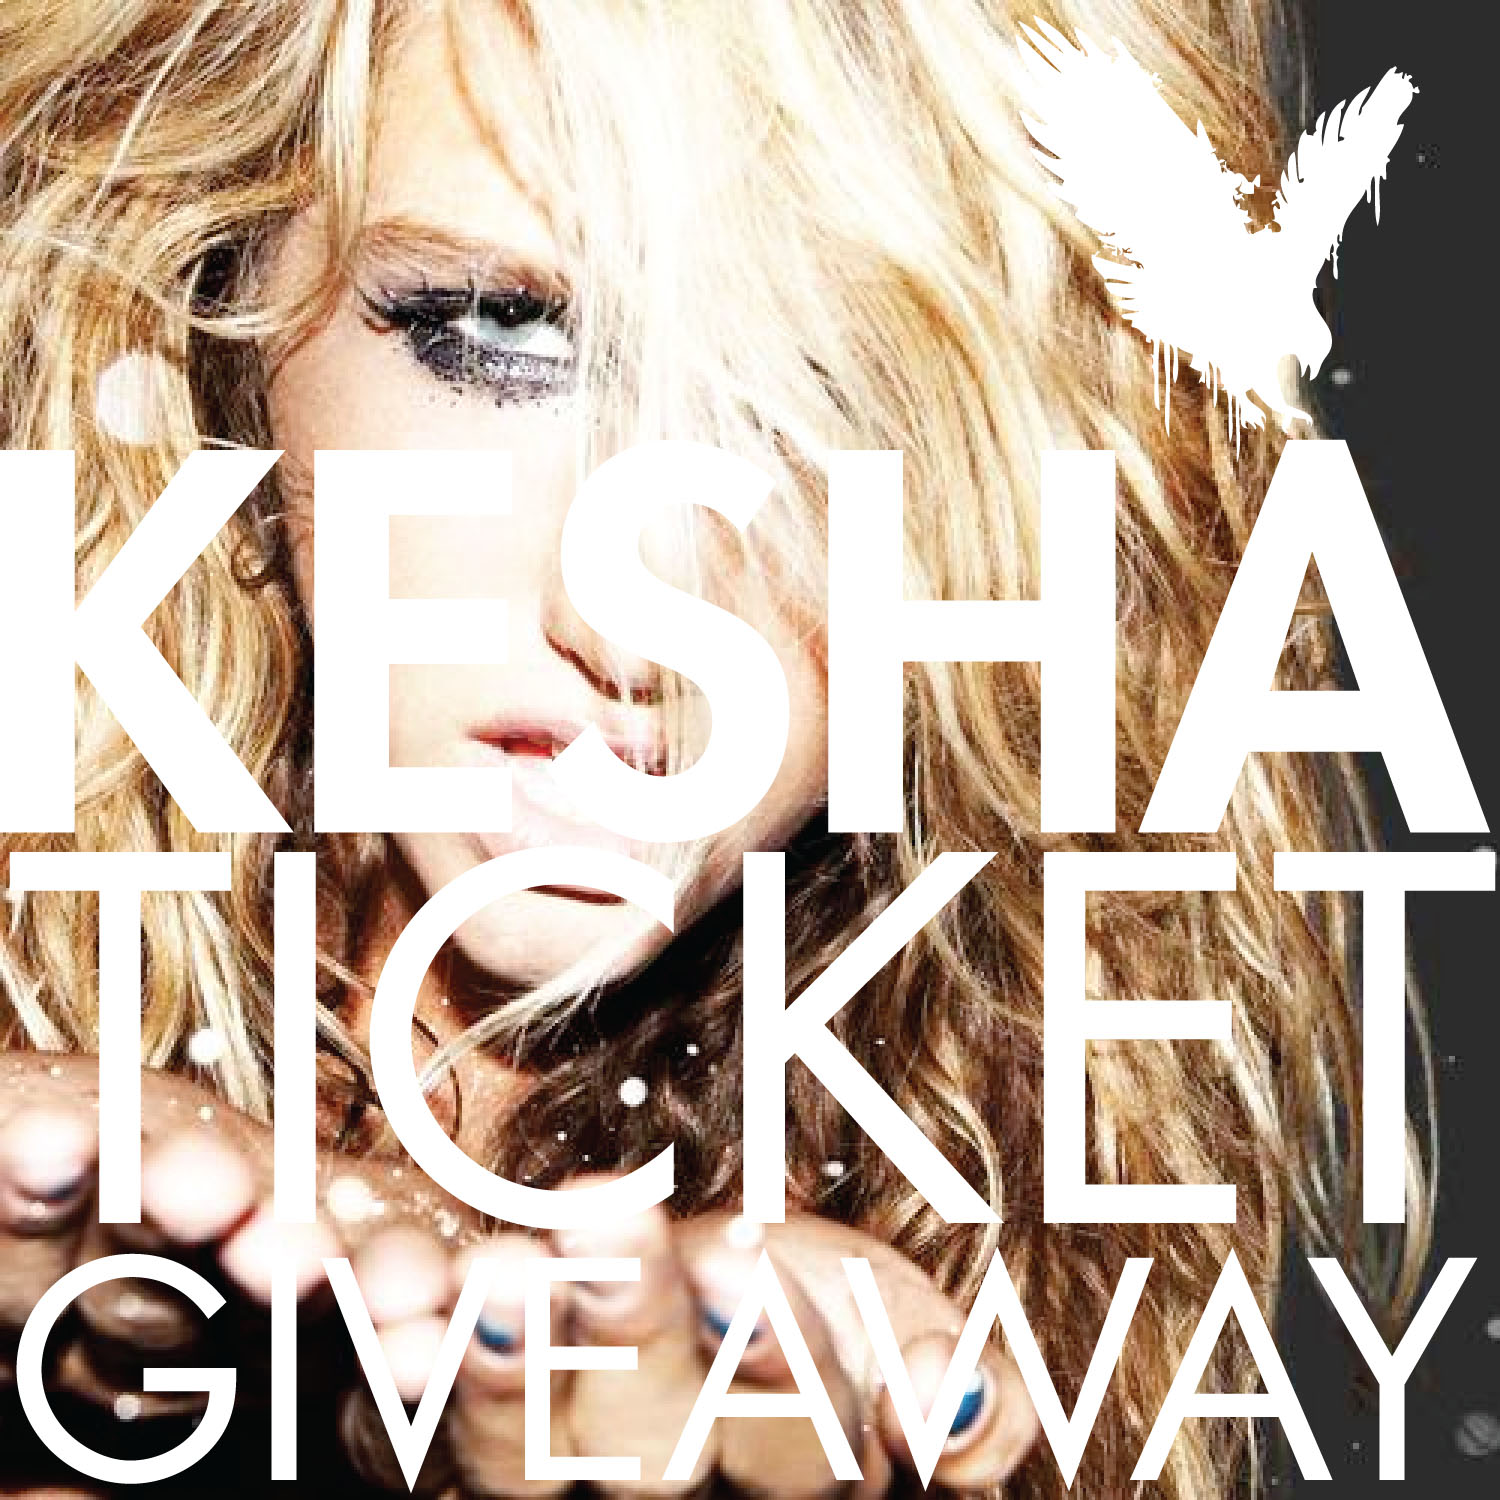 tickets to see Kesha live